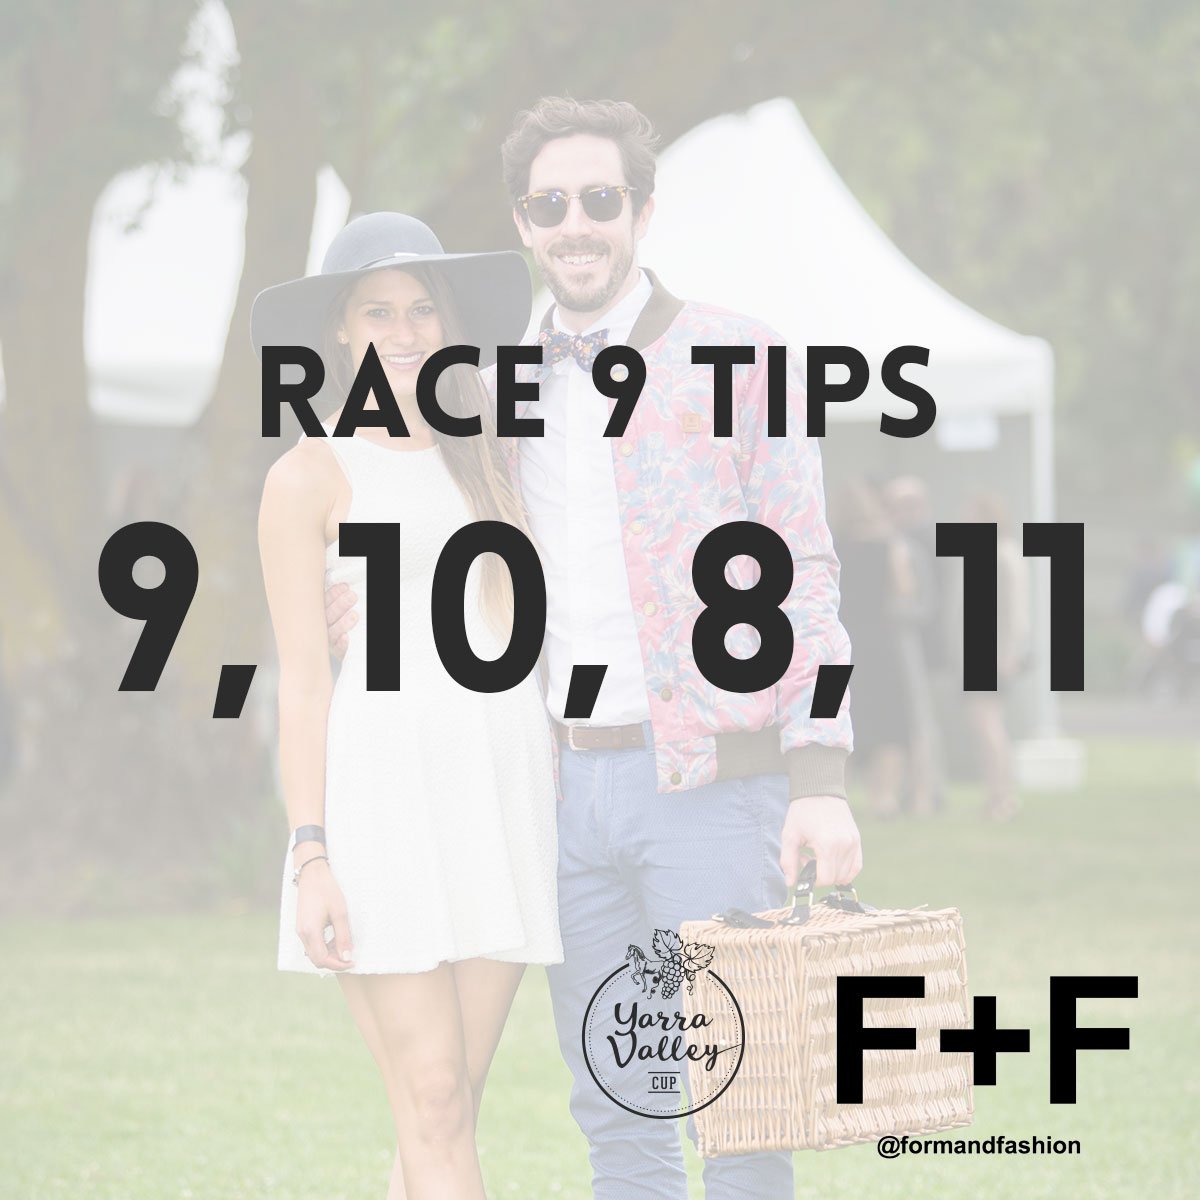 #YVCup Tips for Race 9: 9, 10, 8, 11